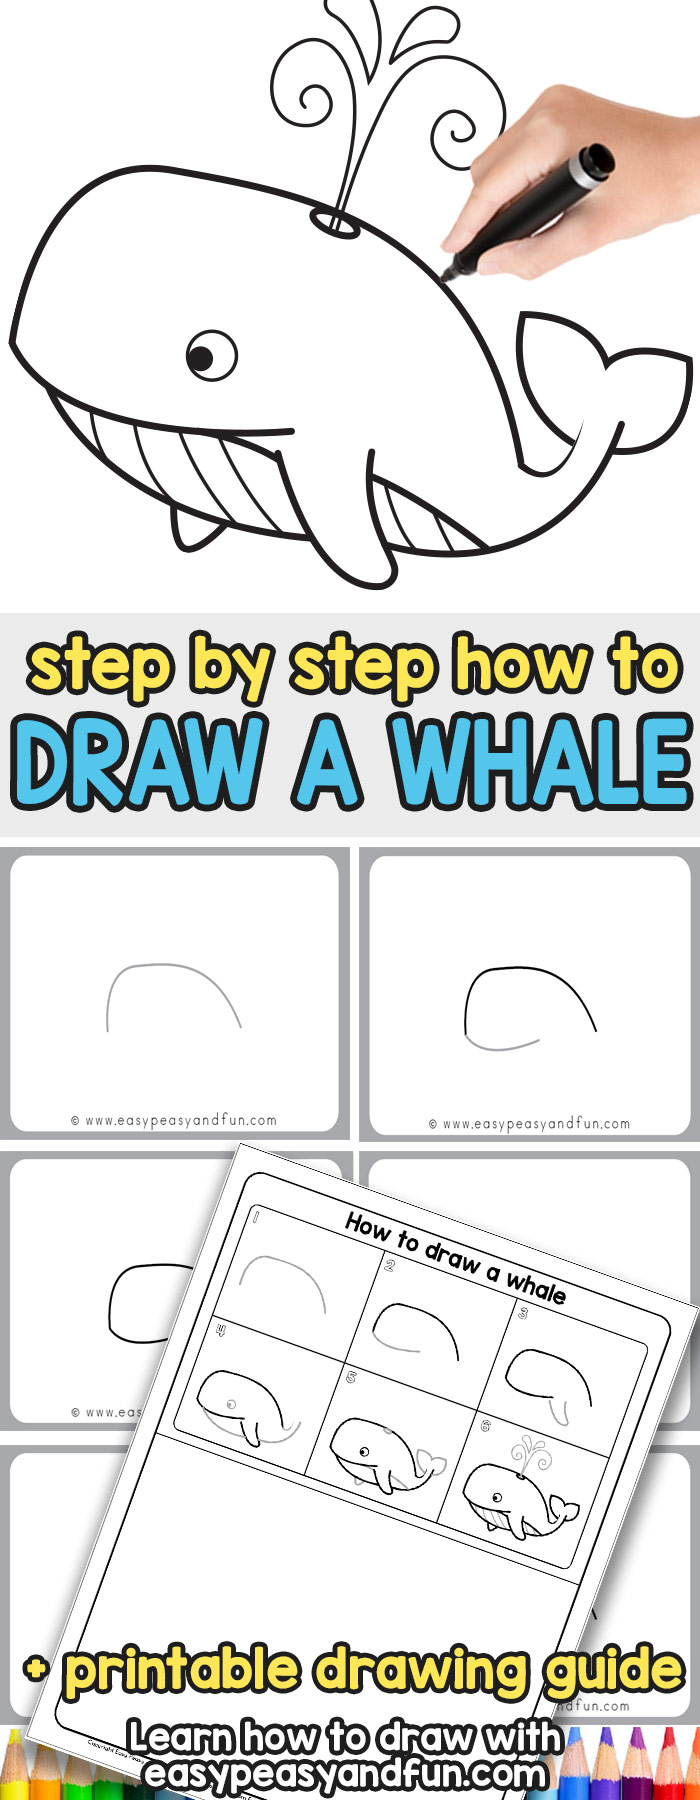 How to Draw a Whale Step by Step Tutorial for Kids (Cartoon Style)